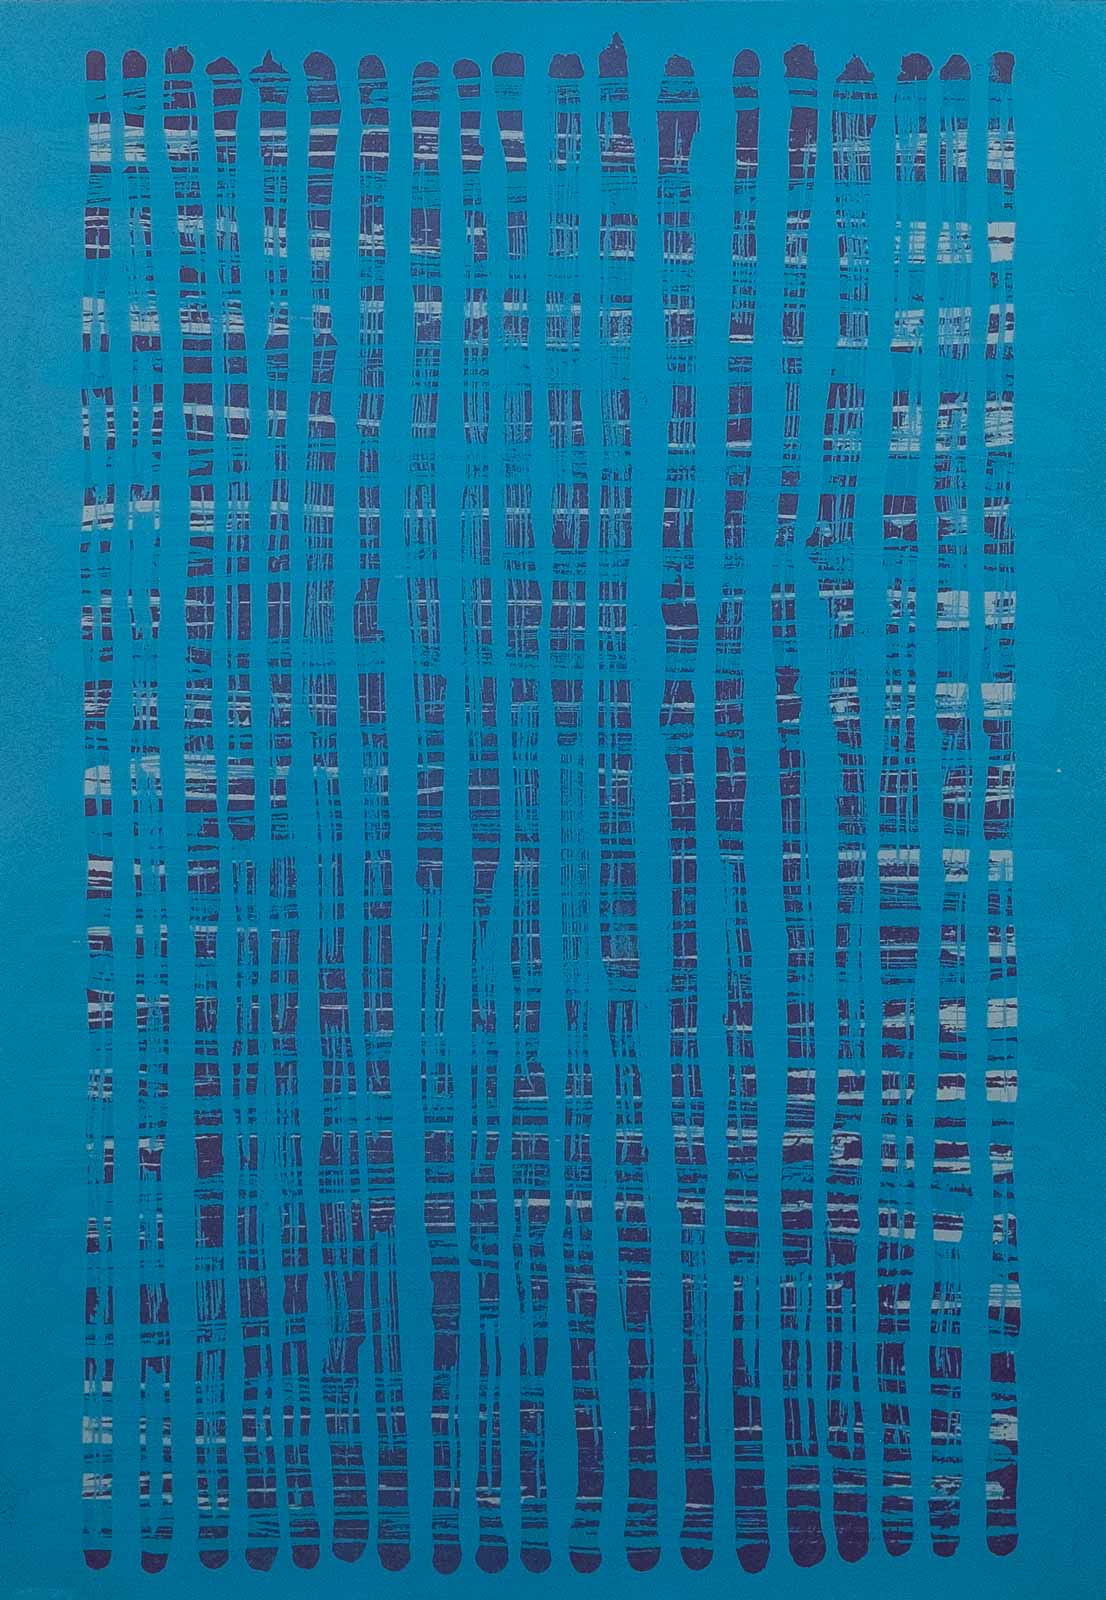 GRID - Acrylic on paper - Format 40x30